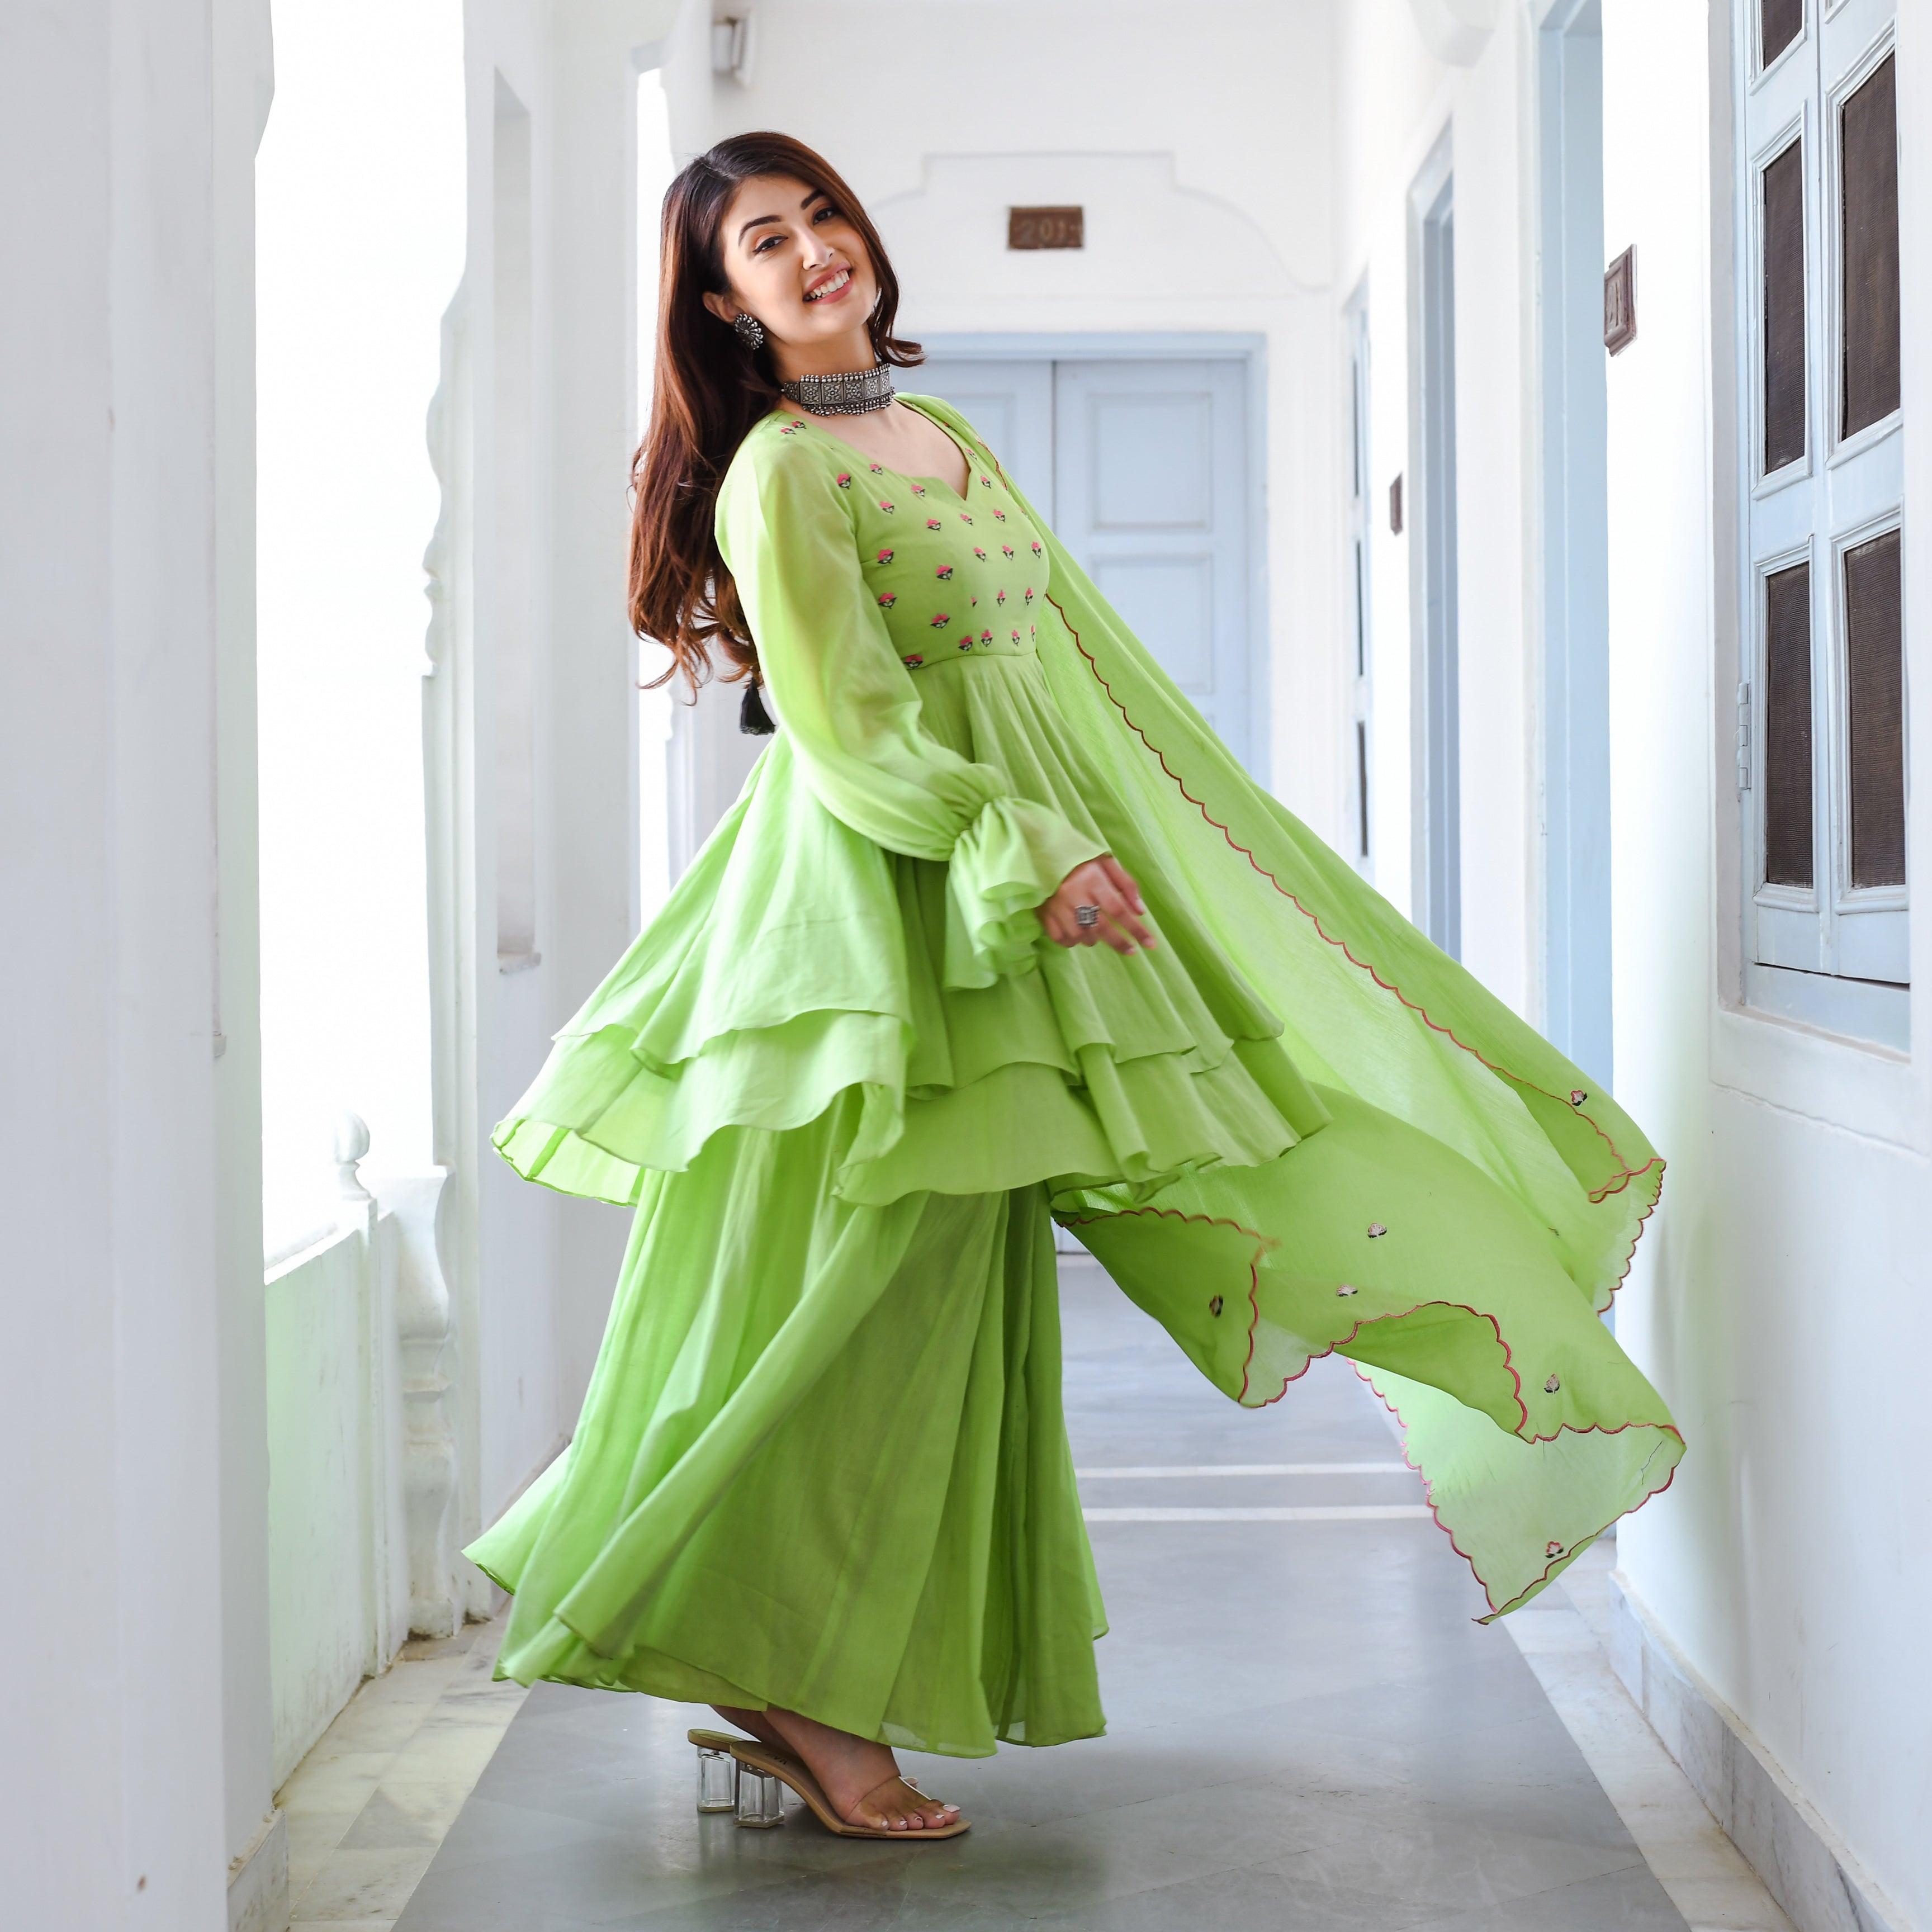 sarojfabrics introduces “Mul Cotton Fabrics”, make co-ord sets, gowns,  sarees, blouses, suits, cushions, and many more Shop Online:… | Instagram